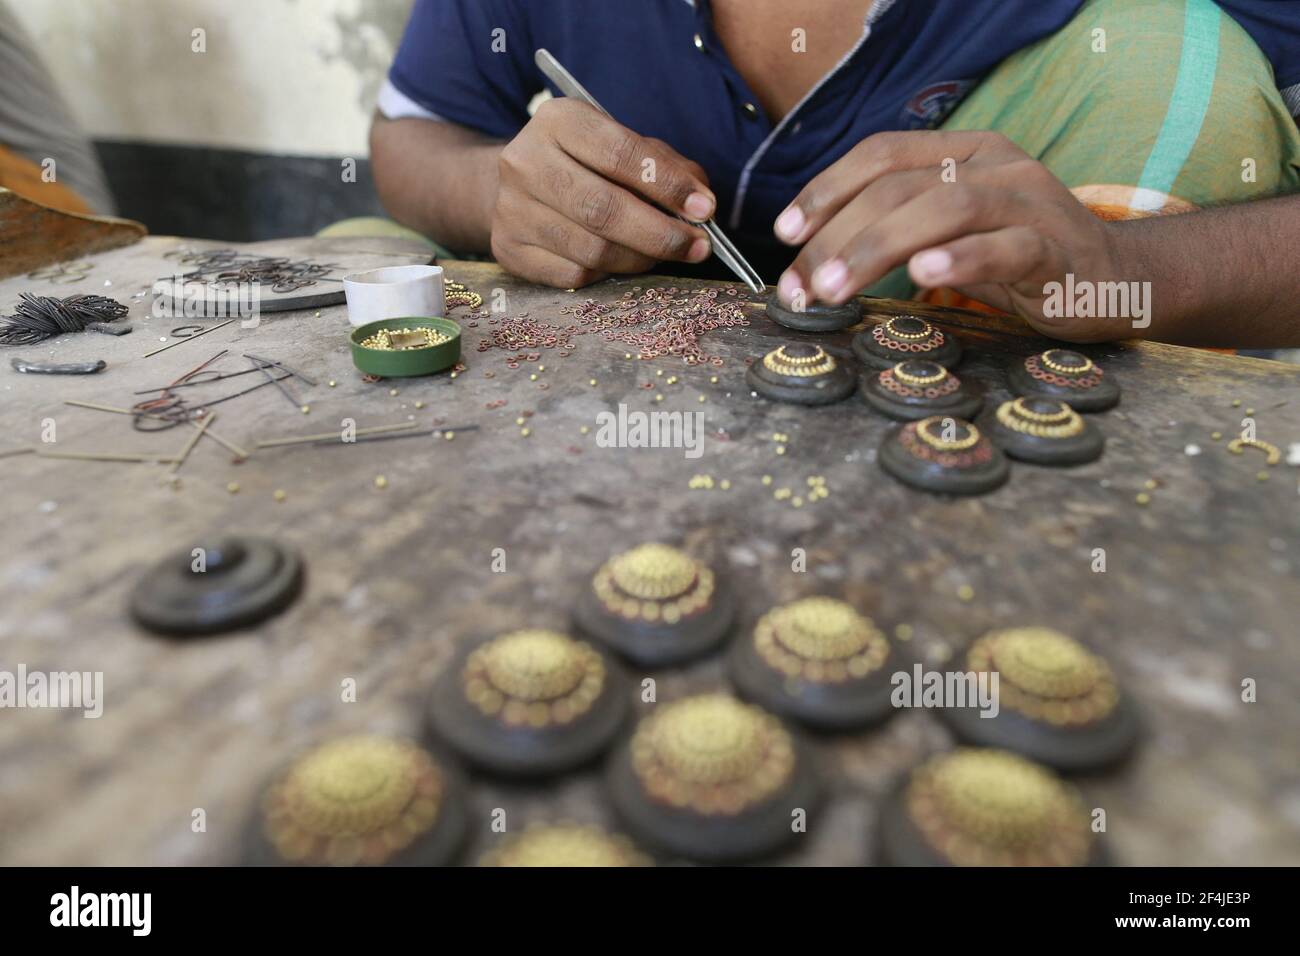 Workers make and sorting out copper and silver jewellery at Bhakurta village in Savar on the outskirts of Dhaka, Bangladesh, March 21, 2021. Thousands of pieces of flashy jewellery found at shops in the capital Dhaka are crafted in this village. Most people these days know the place as 'gohona gram' (jewellery village). Even though the jewellers say they have been living there for a few generations - nearly a century âÂ€Â“ it became well-known as gohona gram only two to three decades back. Making jewelleries is like a household chore in this village. Not just men, women and children also work Stock Photo